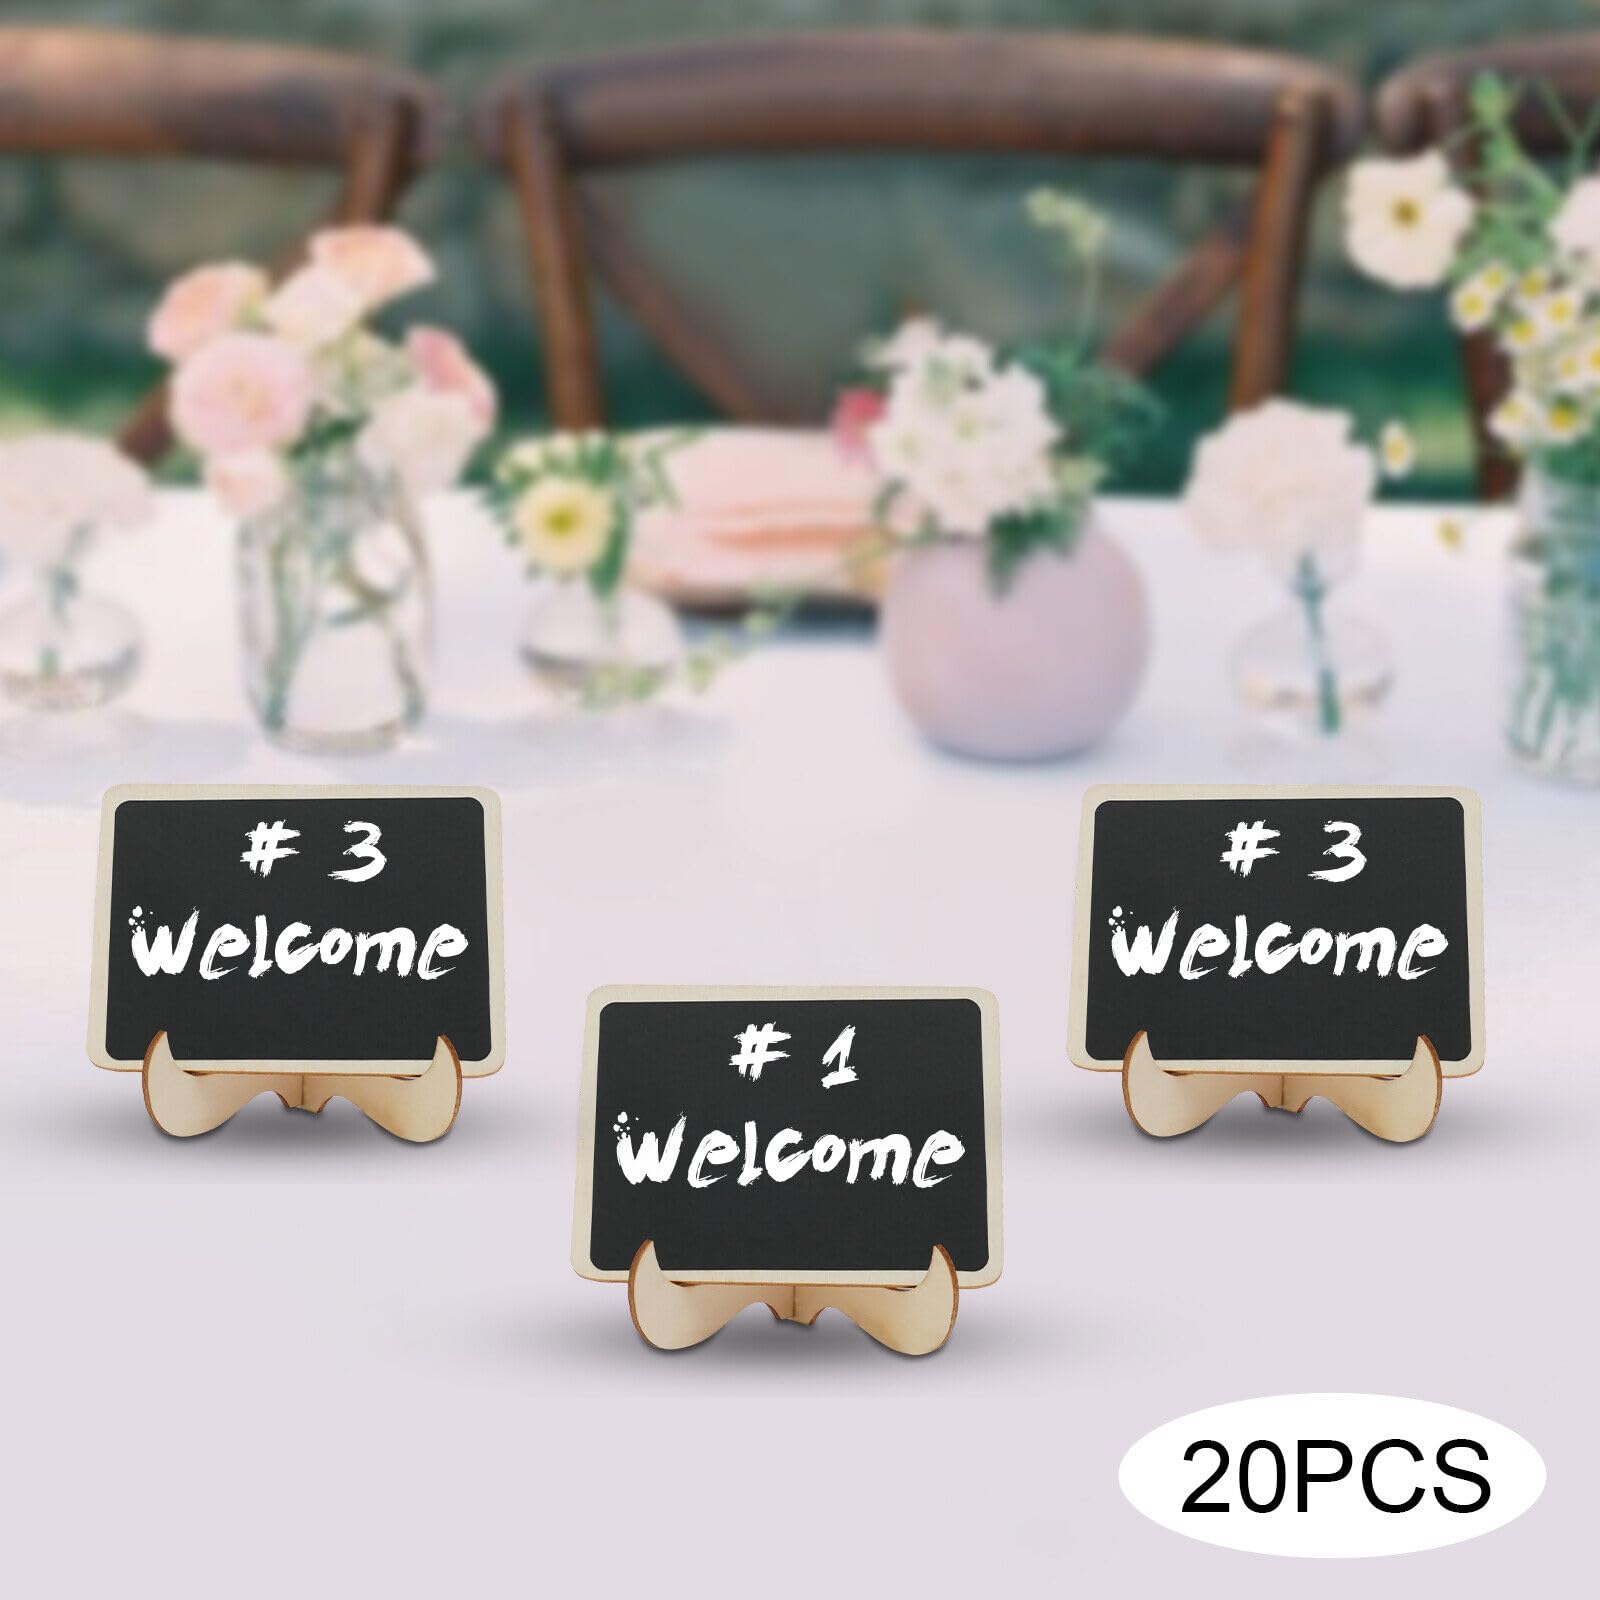 20 Pcs Mini Chalkboard Signs Small Chalkboard Labels w/Easel Stand,Chalkboard Place Cards,Table Numbers,Food Labels for Party Buffet,Weddings,Special Events